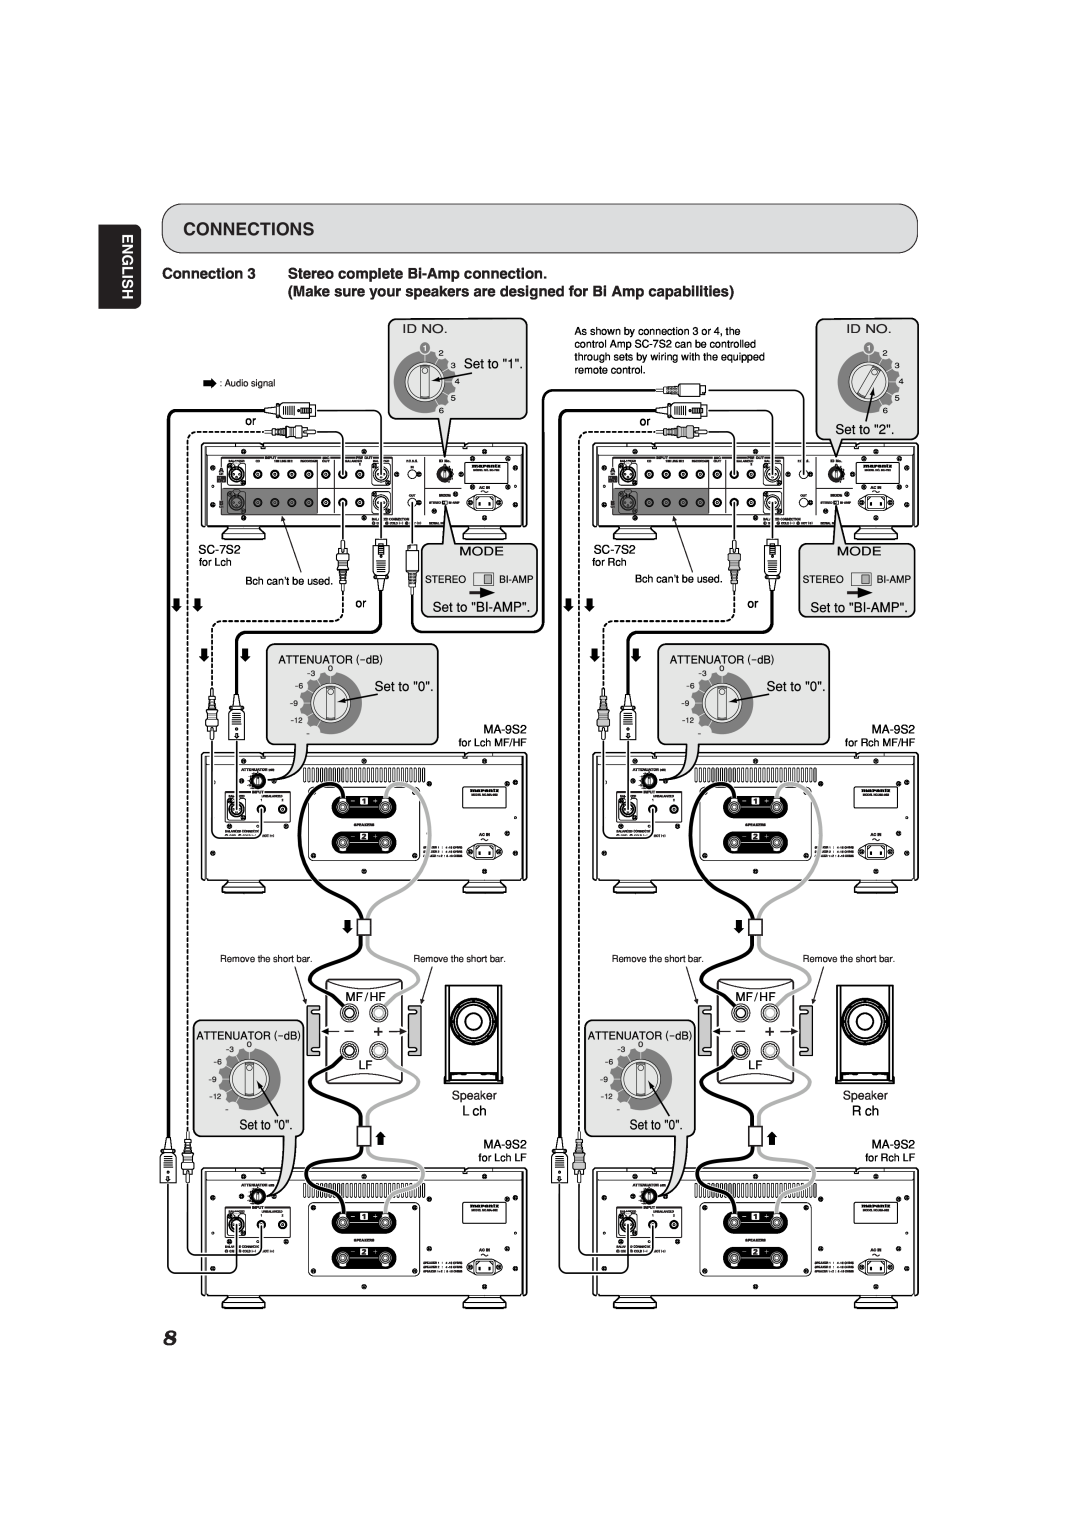 Marantz MA-9S2 manual Connections, English, Connection 3 Stereo complete Bi-Ampconnection, Set to 